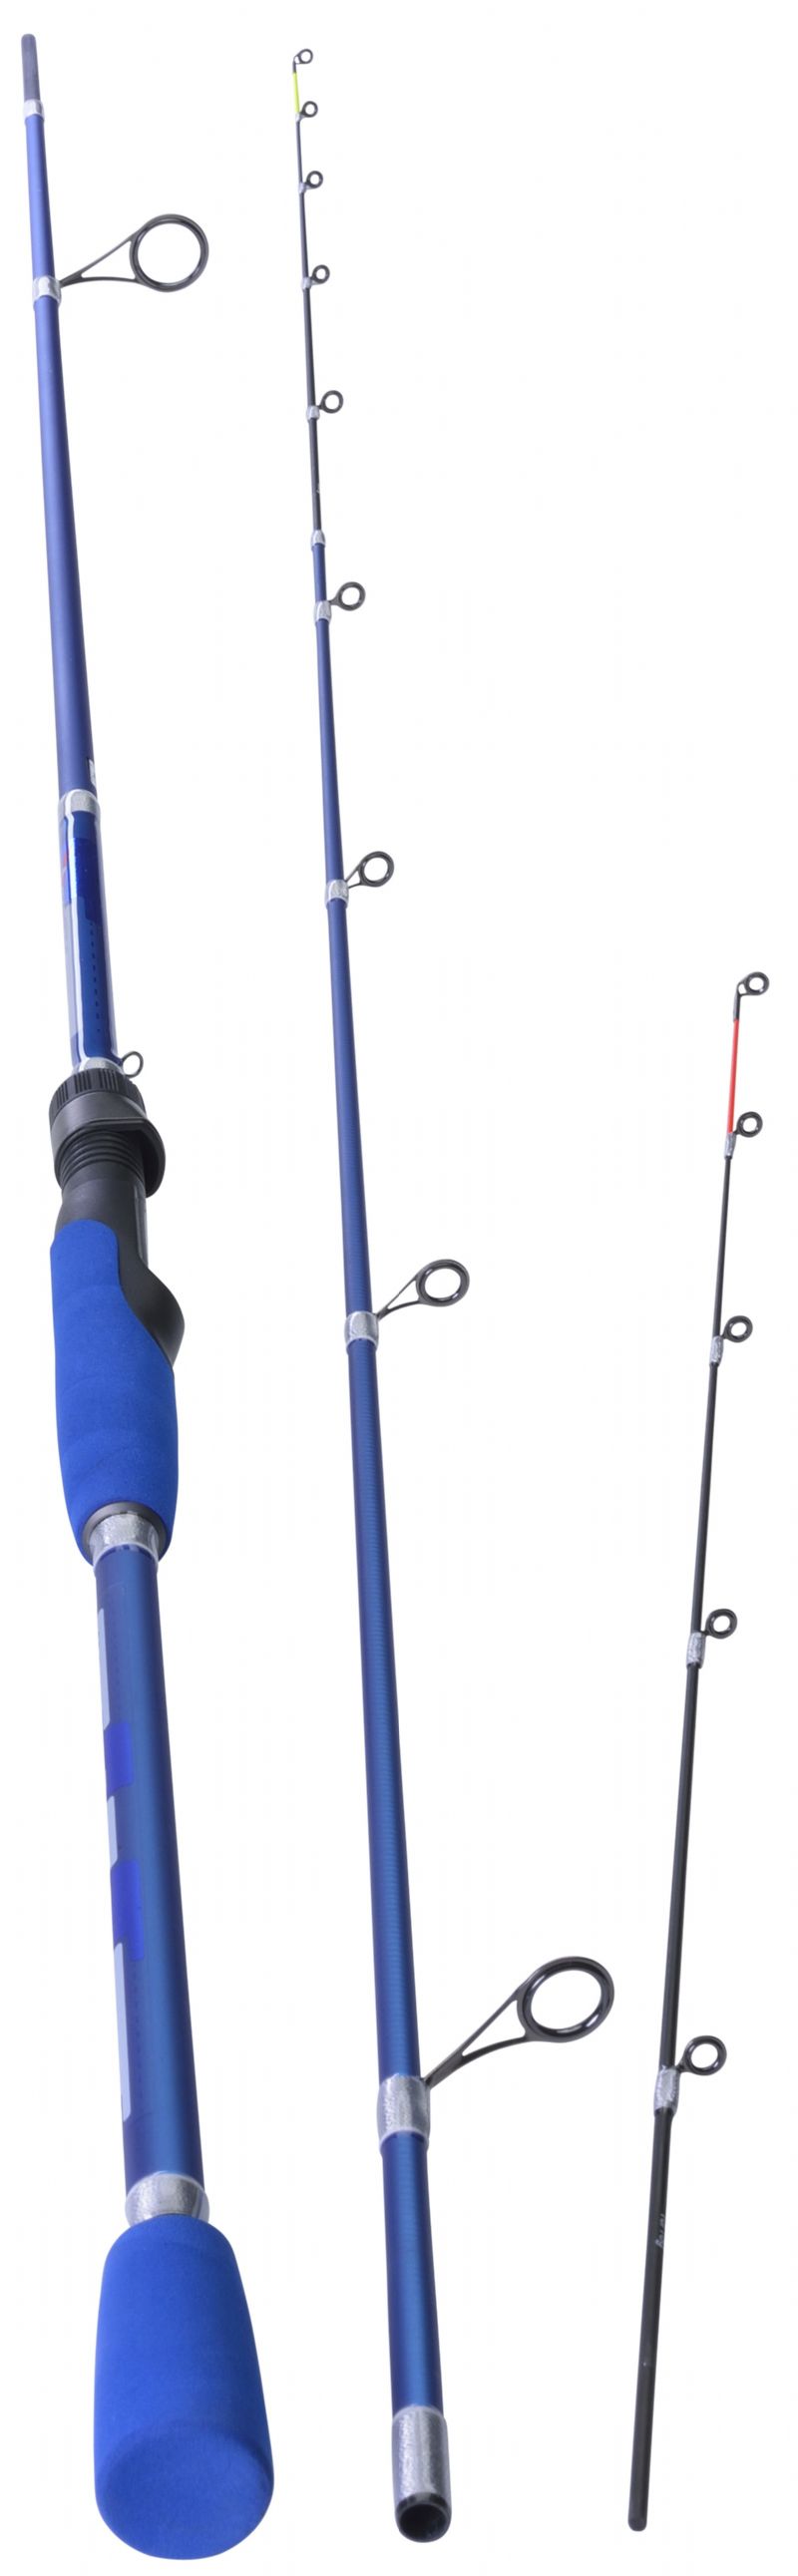 new rods from Shakespeare 2017, Agility Range, terrys travels